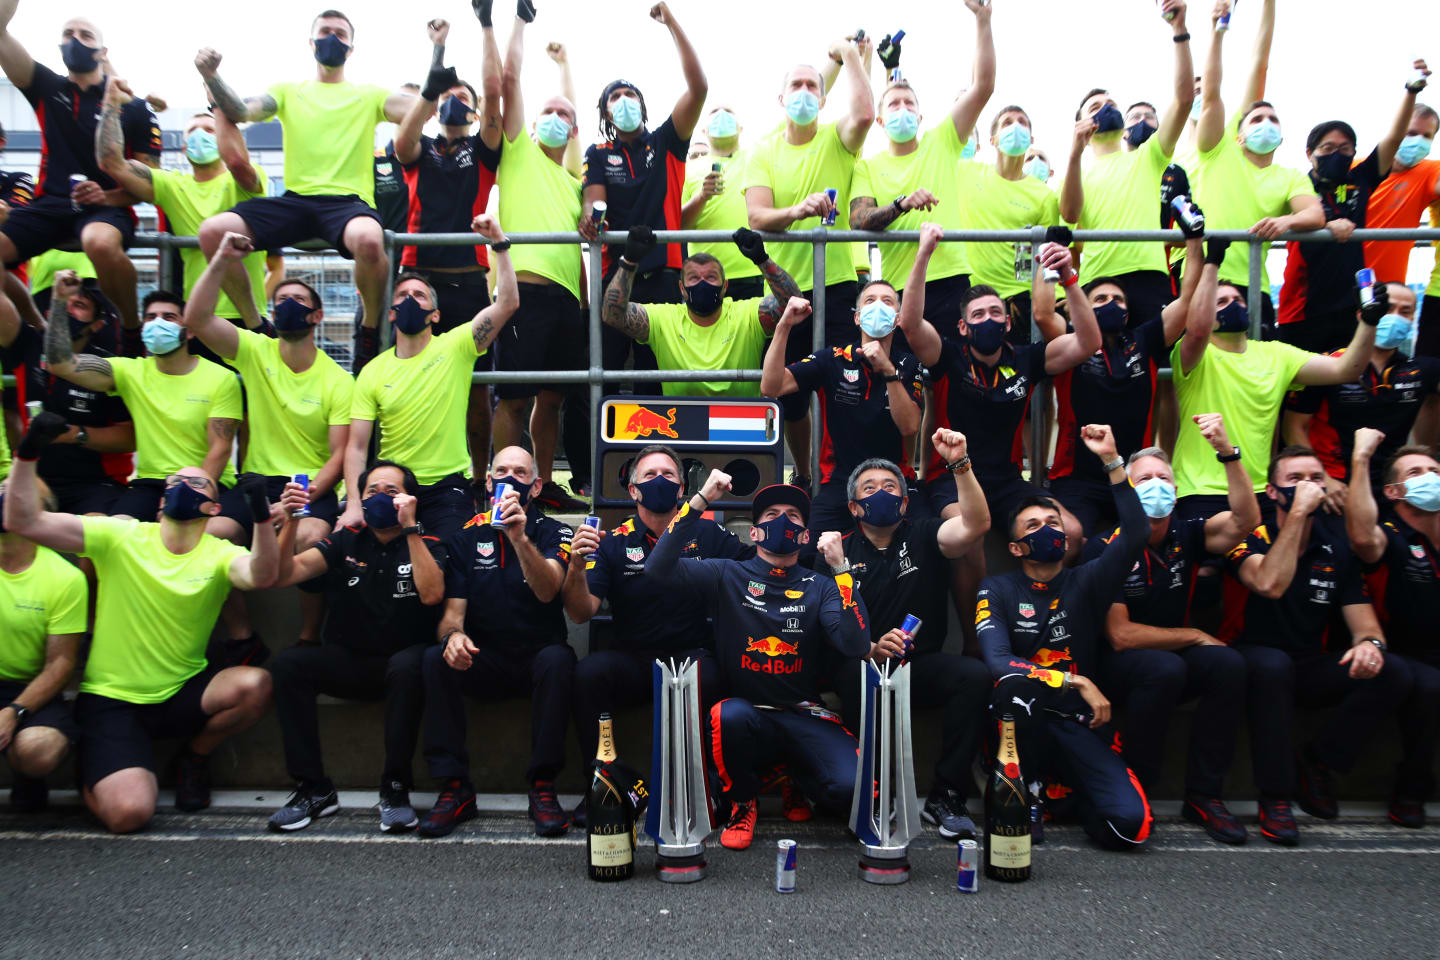 NORTHAMPTON, ENGLAND - AUGUST 09: Race winner Max Verstappen of Netherlands and Red Bull Racing celebrates with his team after the F1 70th Anniversary Grand Prix at Silverstone on August 09, 2020 in Northampton, England. (Photo by Mark Thompson/Getty Images)